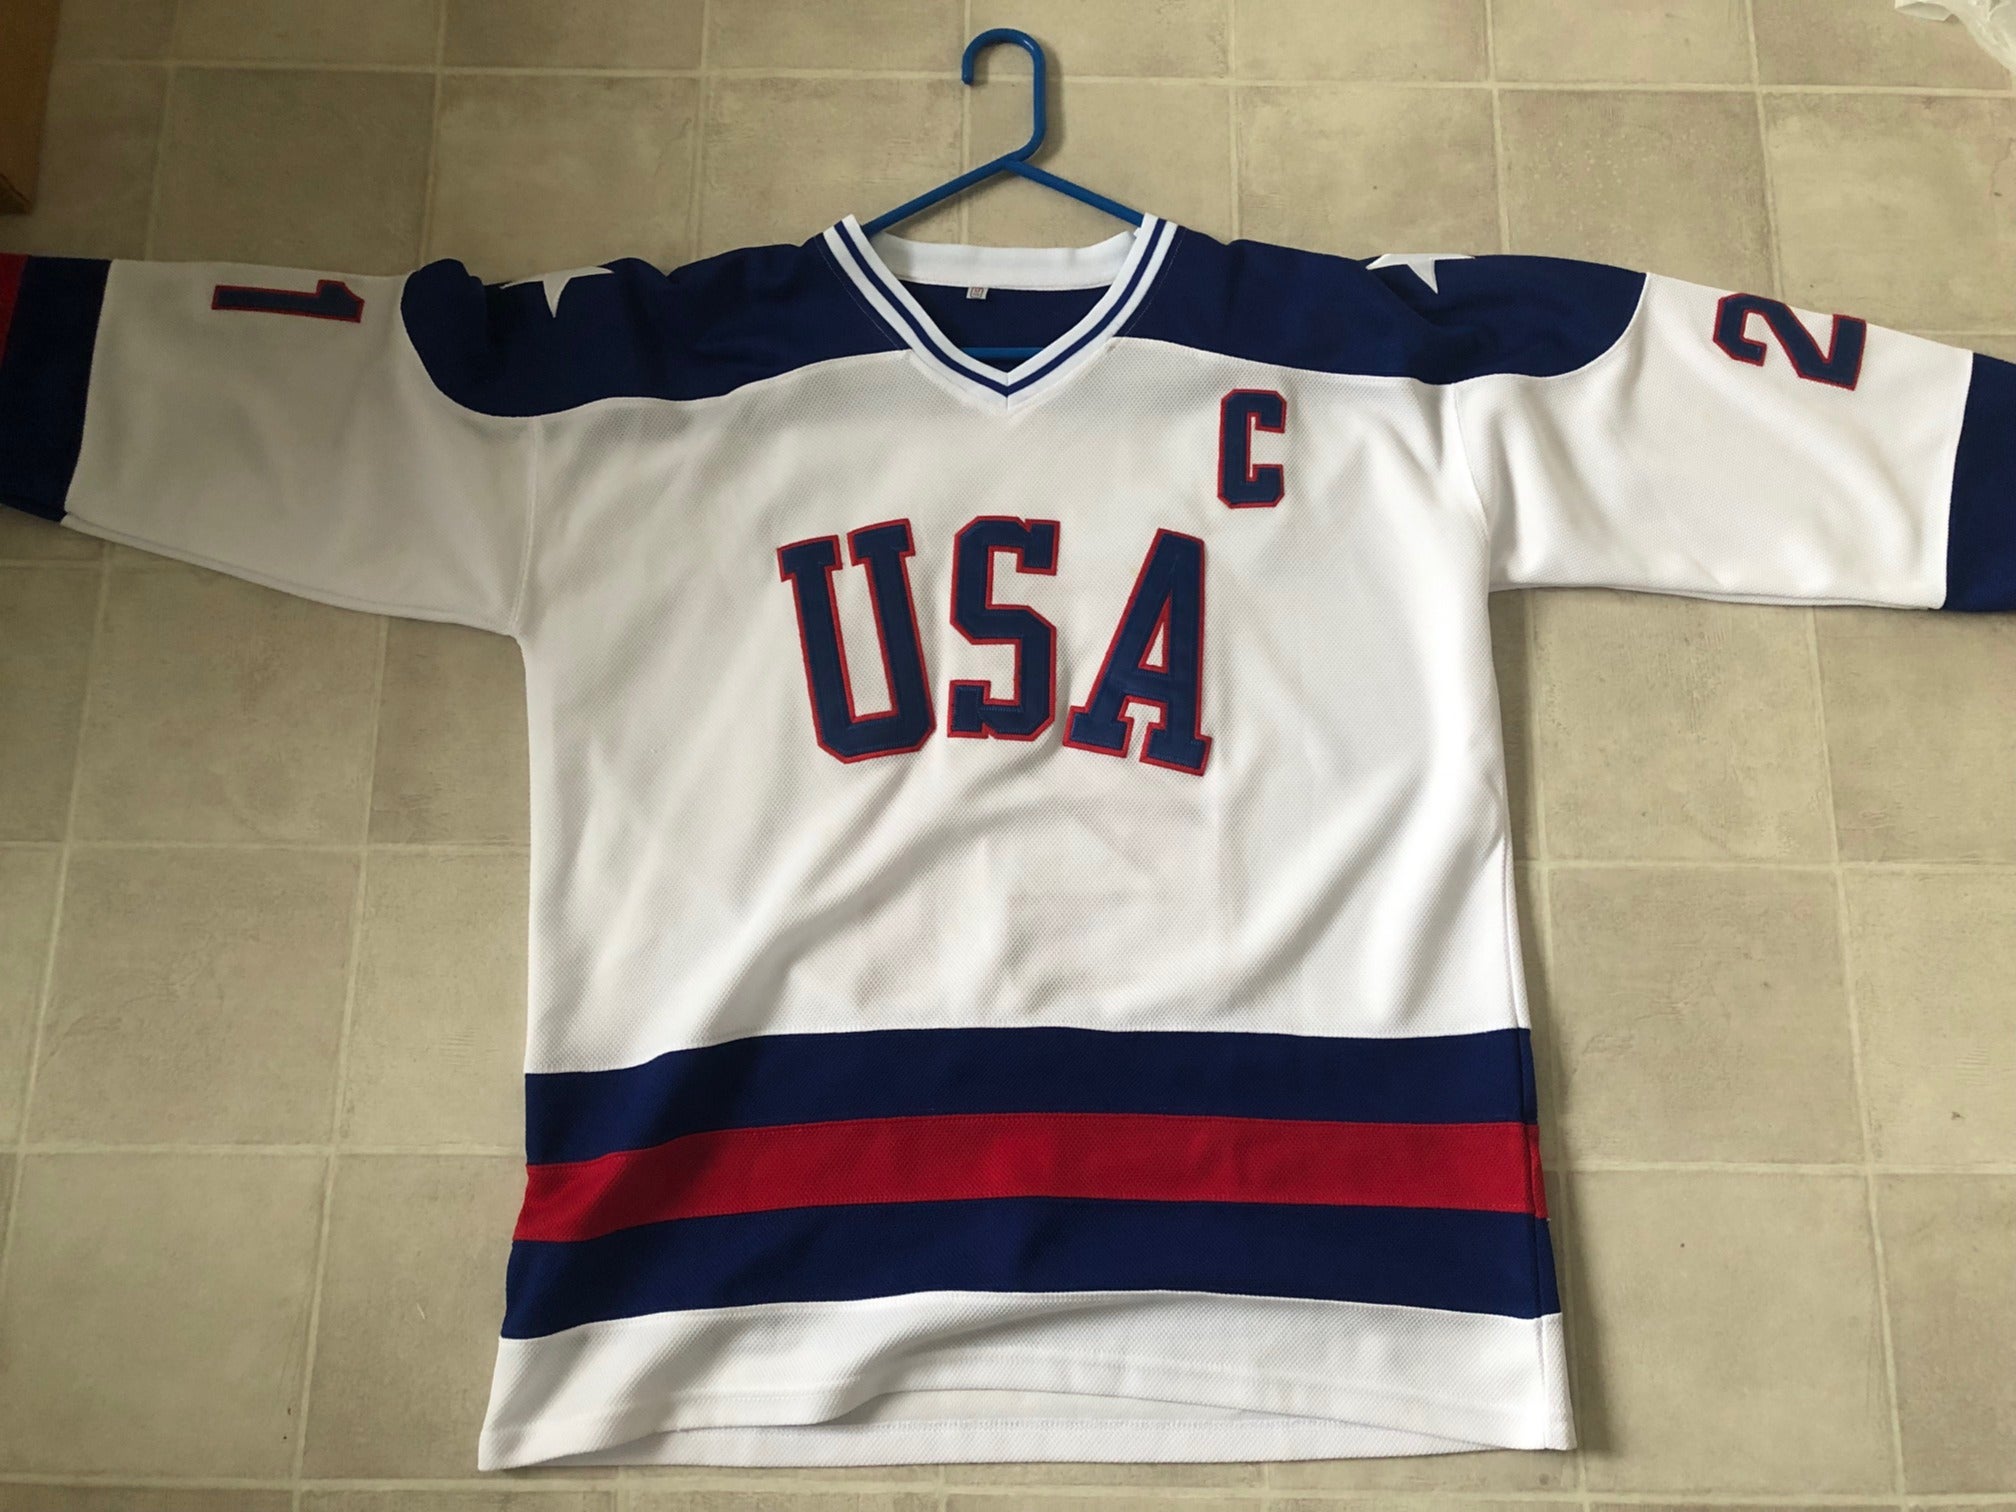 to Die for Collectibles 1980 USA “Miracle on Ice” #21 Captain Mike Eruzione White Olympic Hockey Jersey, Size XXL